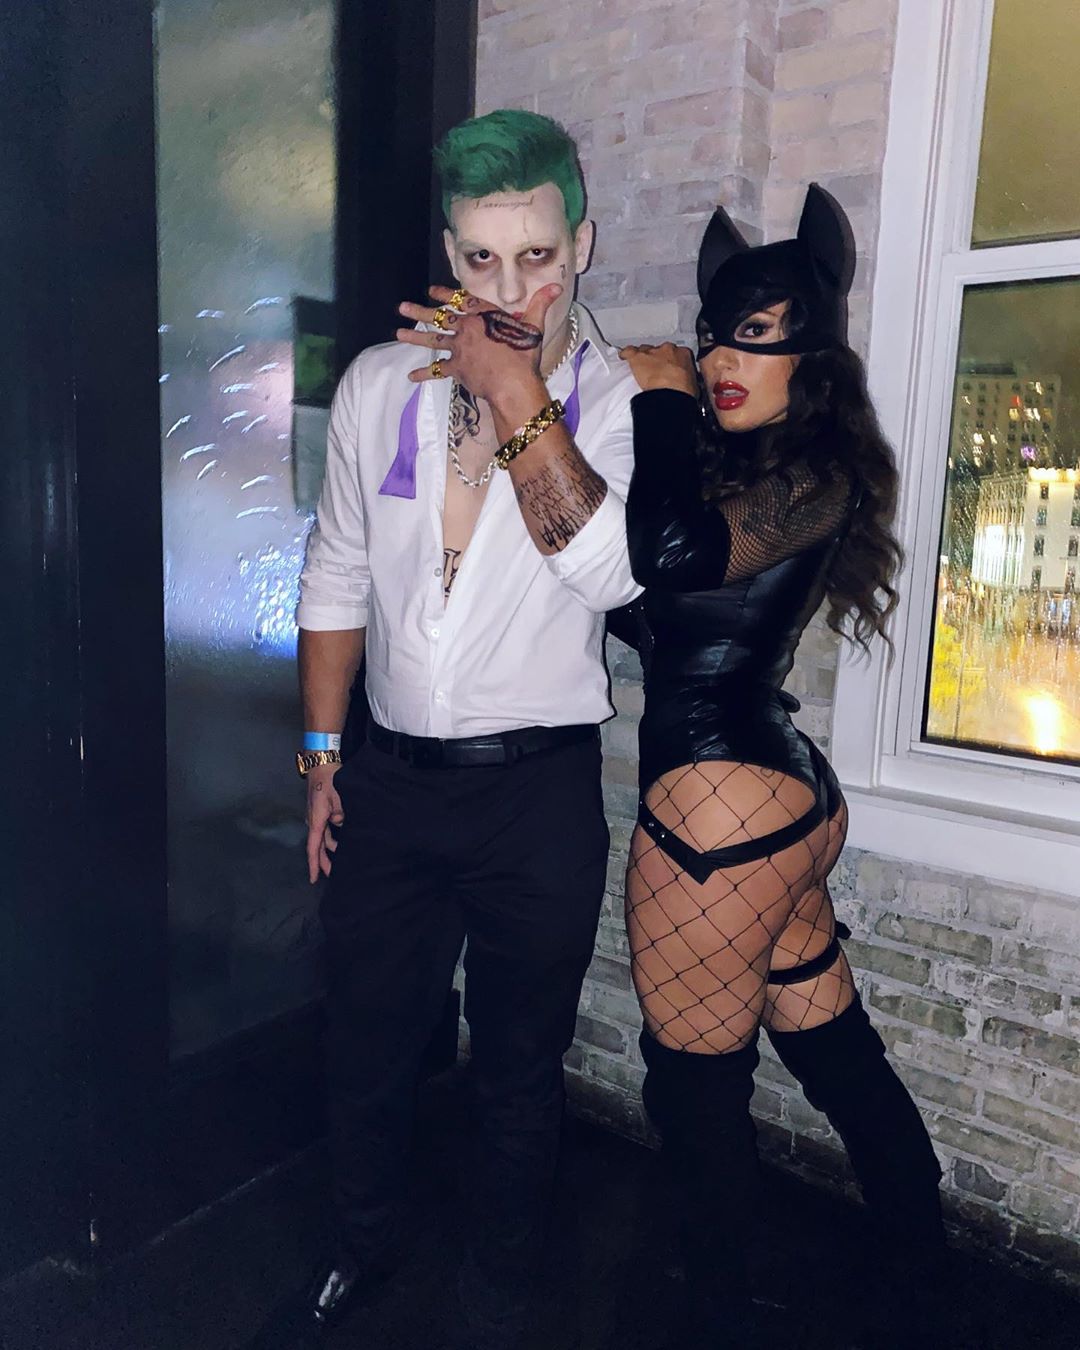 26 Couples Halloween costumes that'll make you stand out - juelzjohn